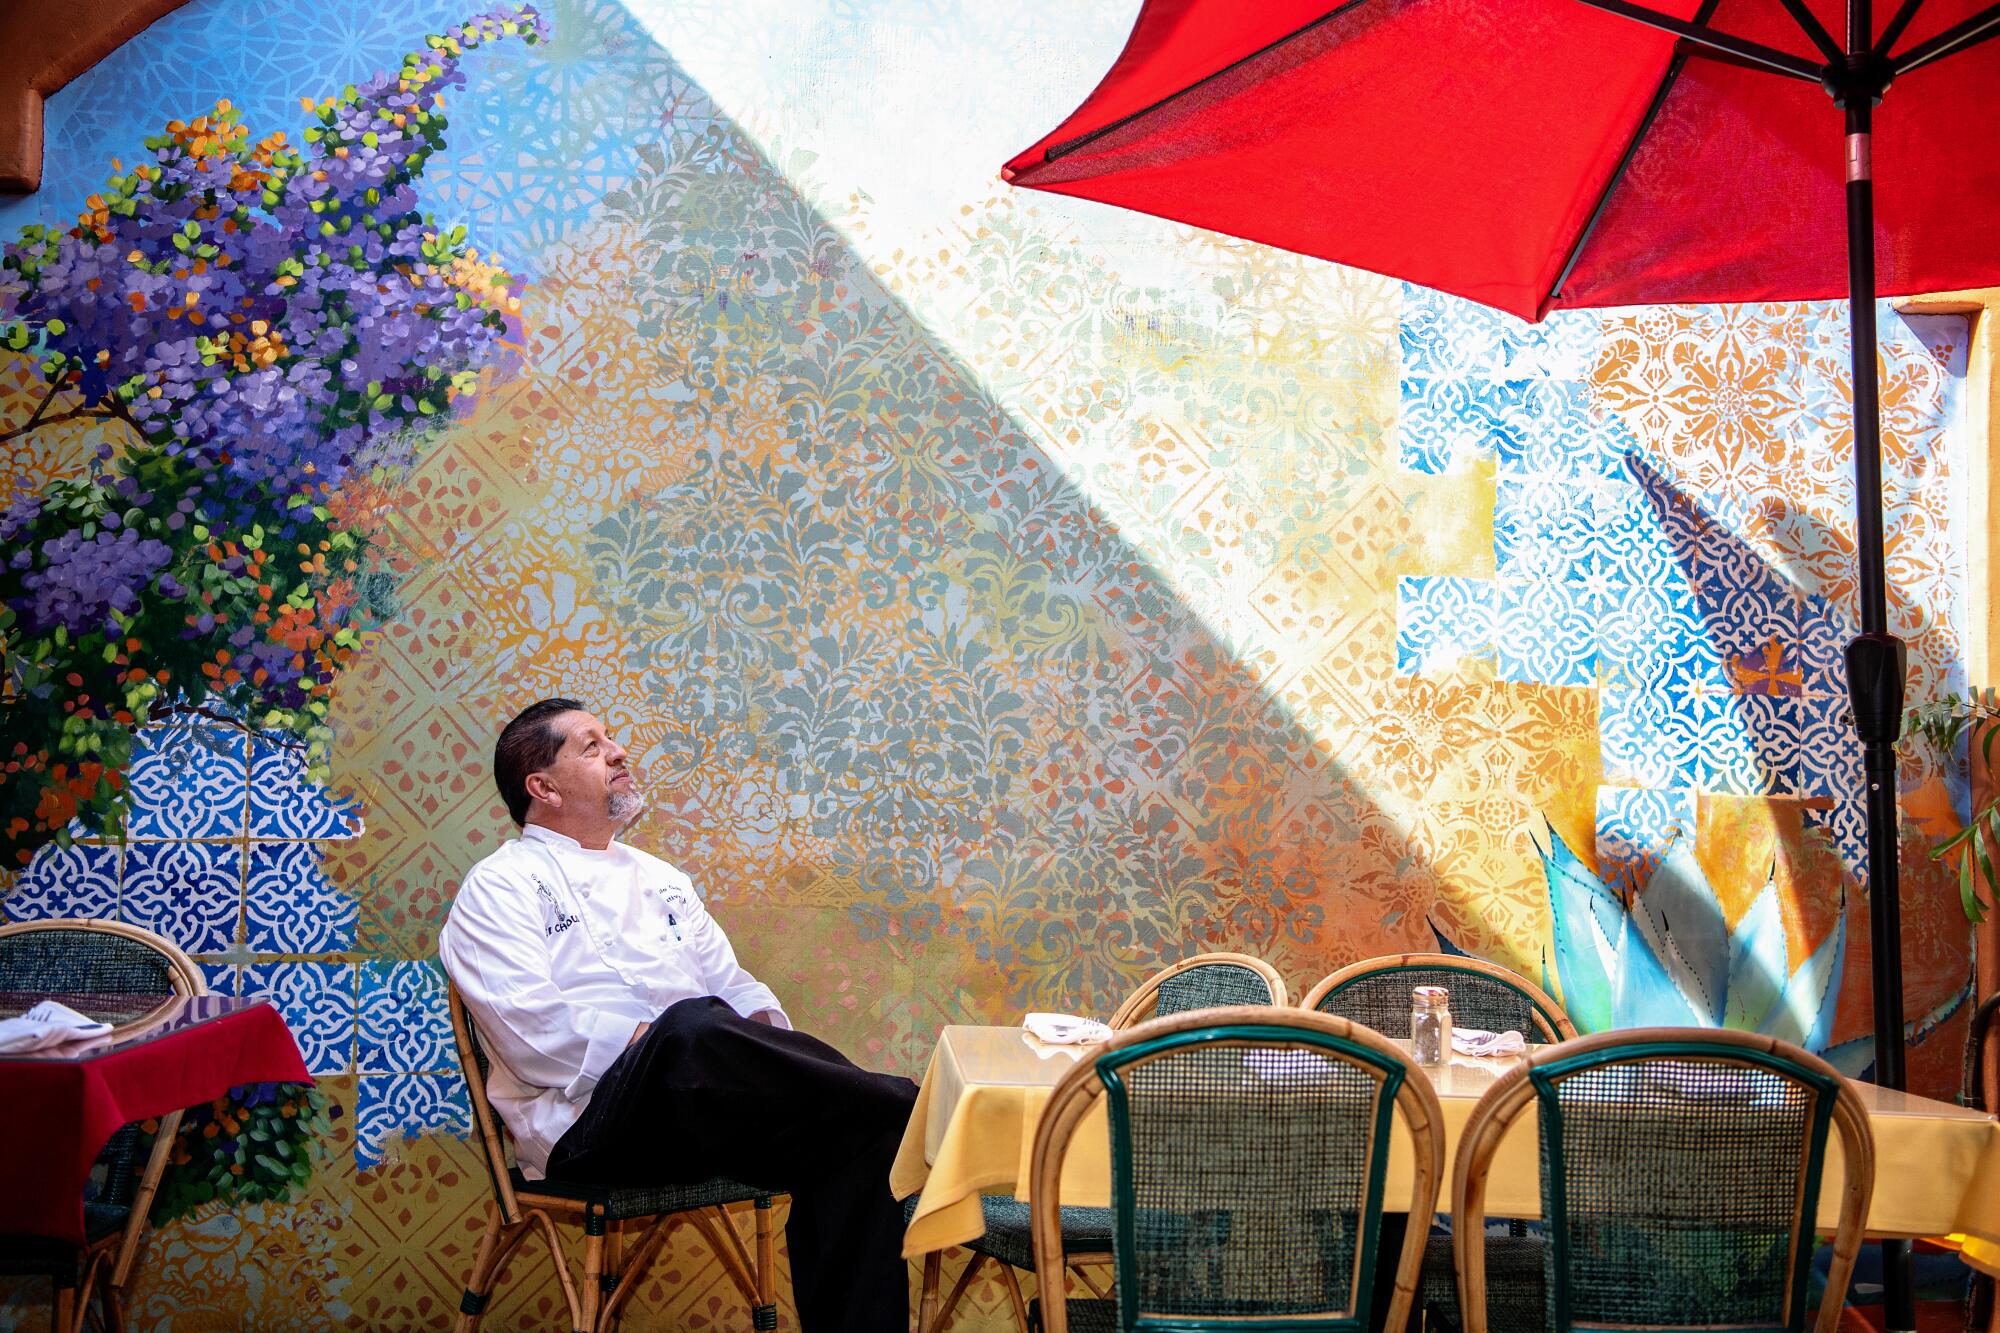 Sergio Ochoa sitting at an outdoor table, in front of an ornate mural.